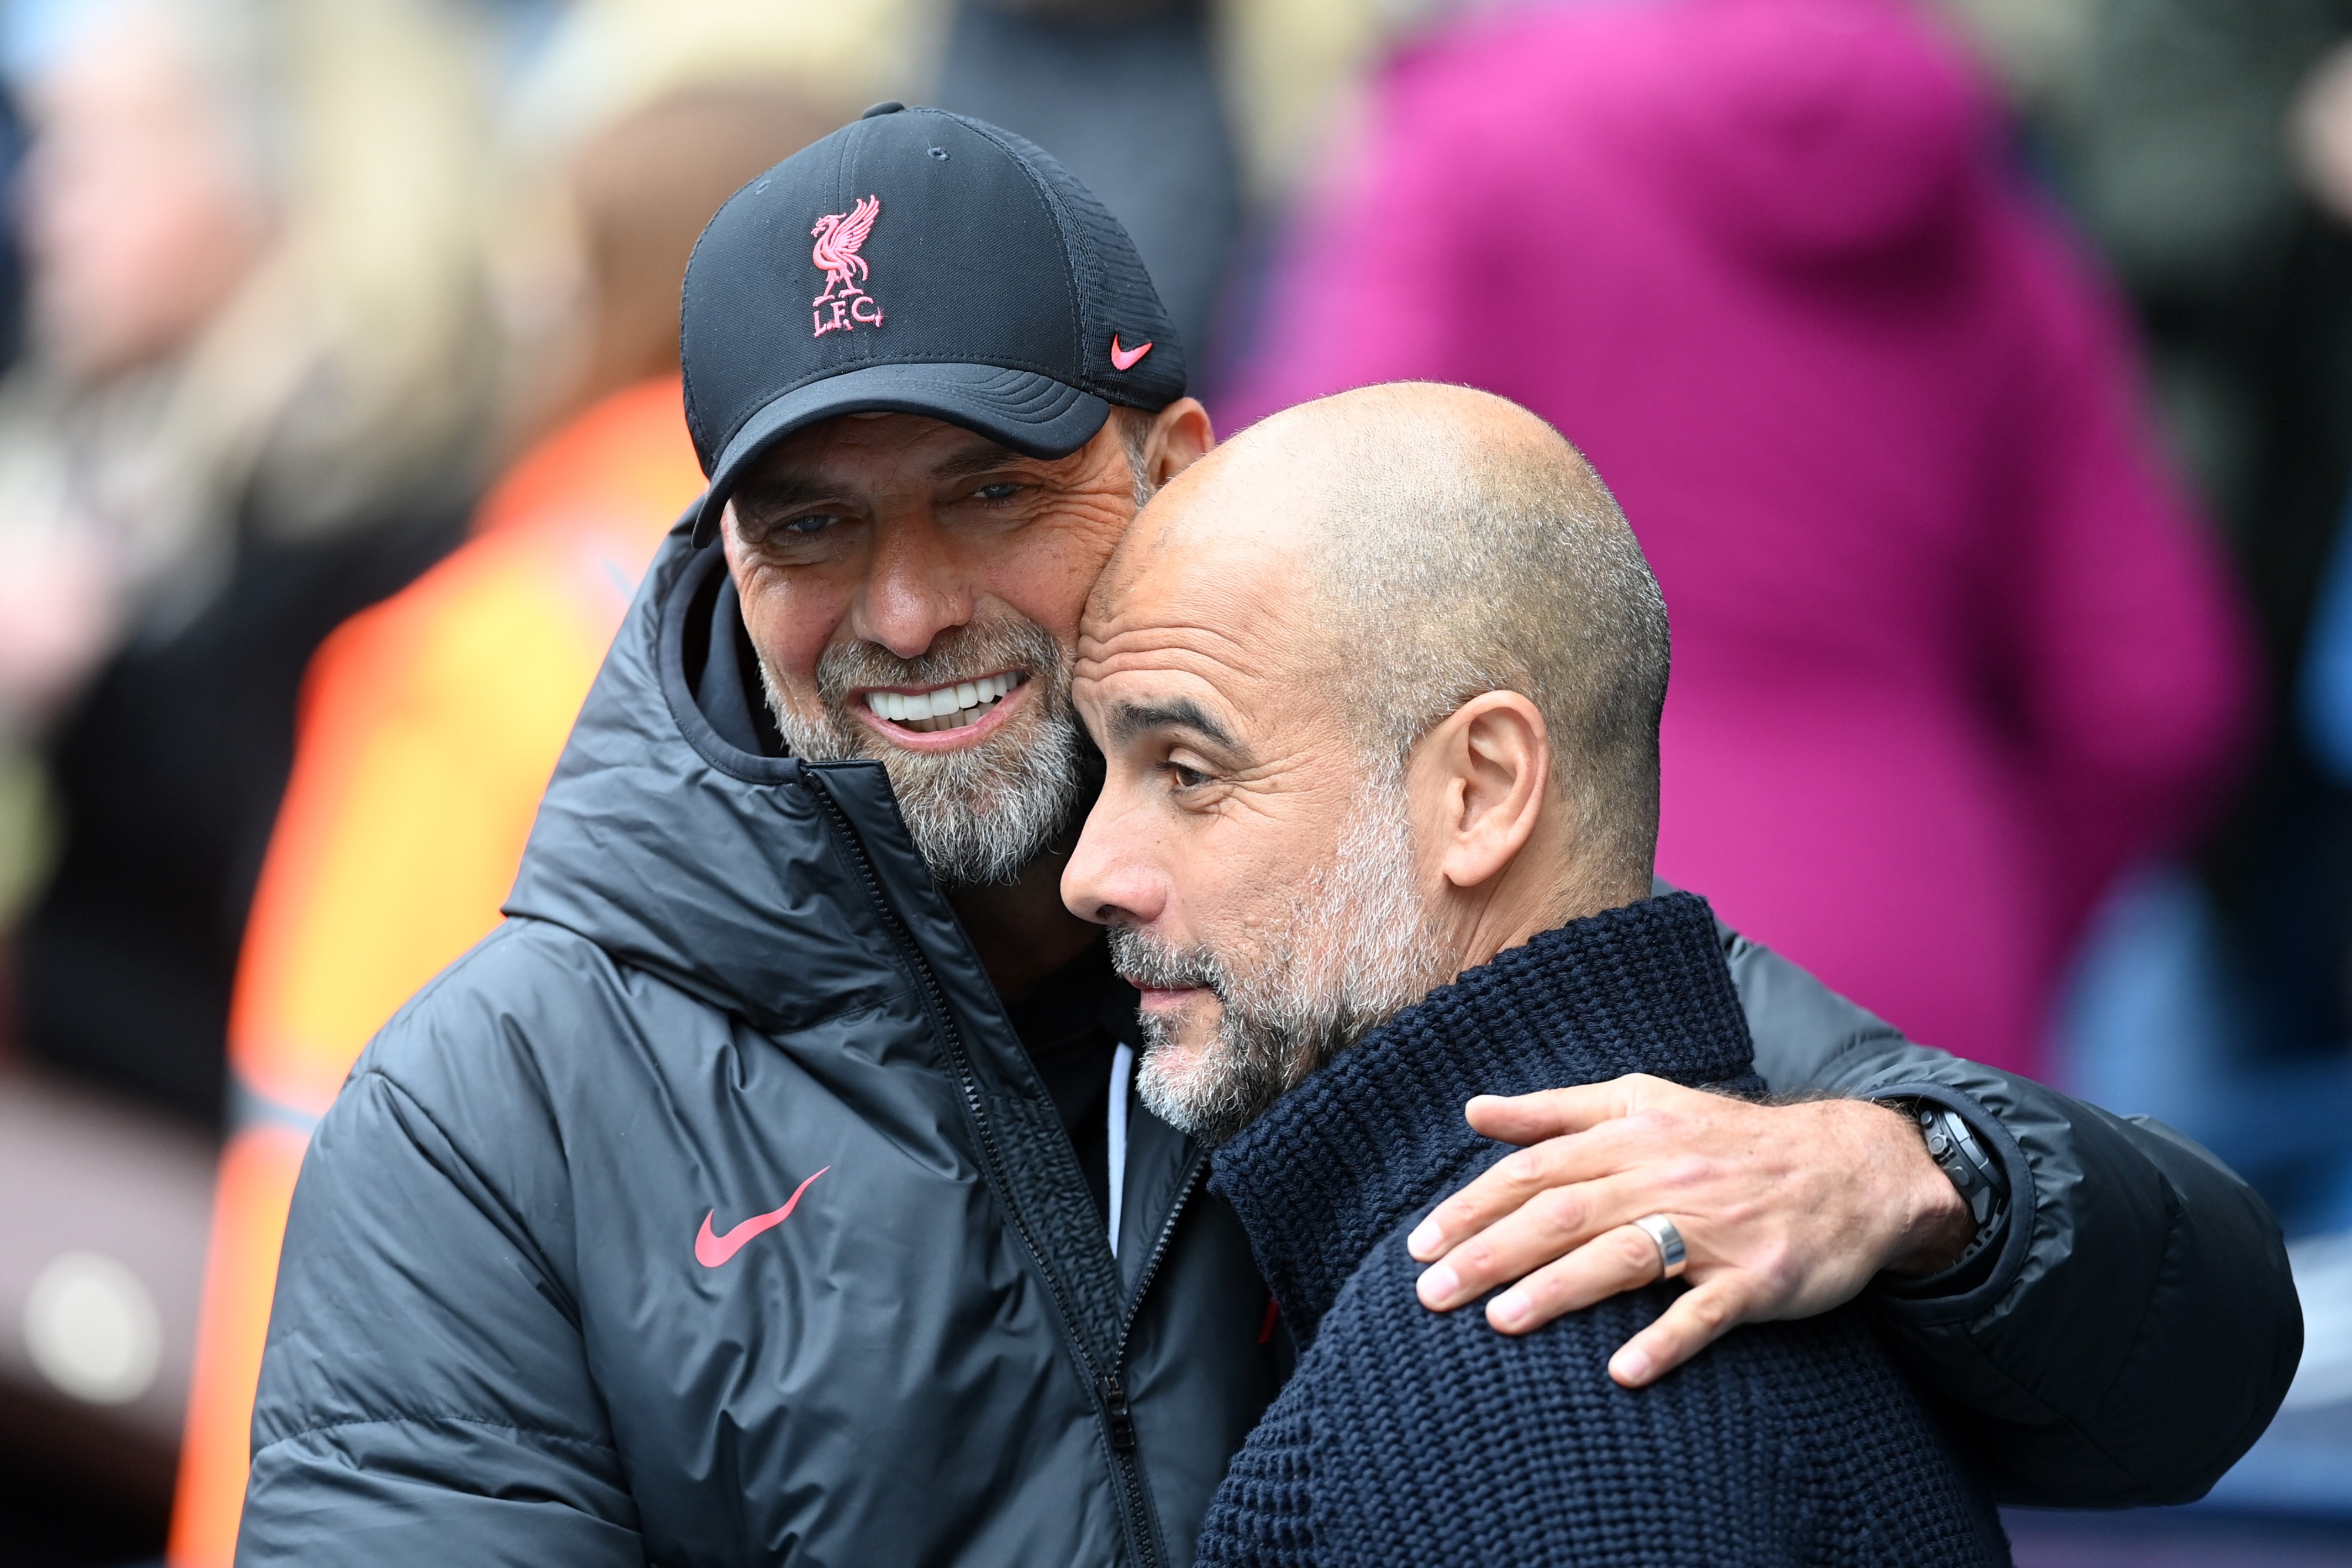 “I will sleep a little bit better” – Guardiola’s playful dig at Klopp after Liverpool manager’s announcement